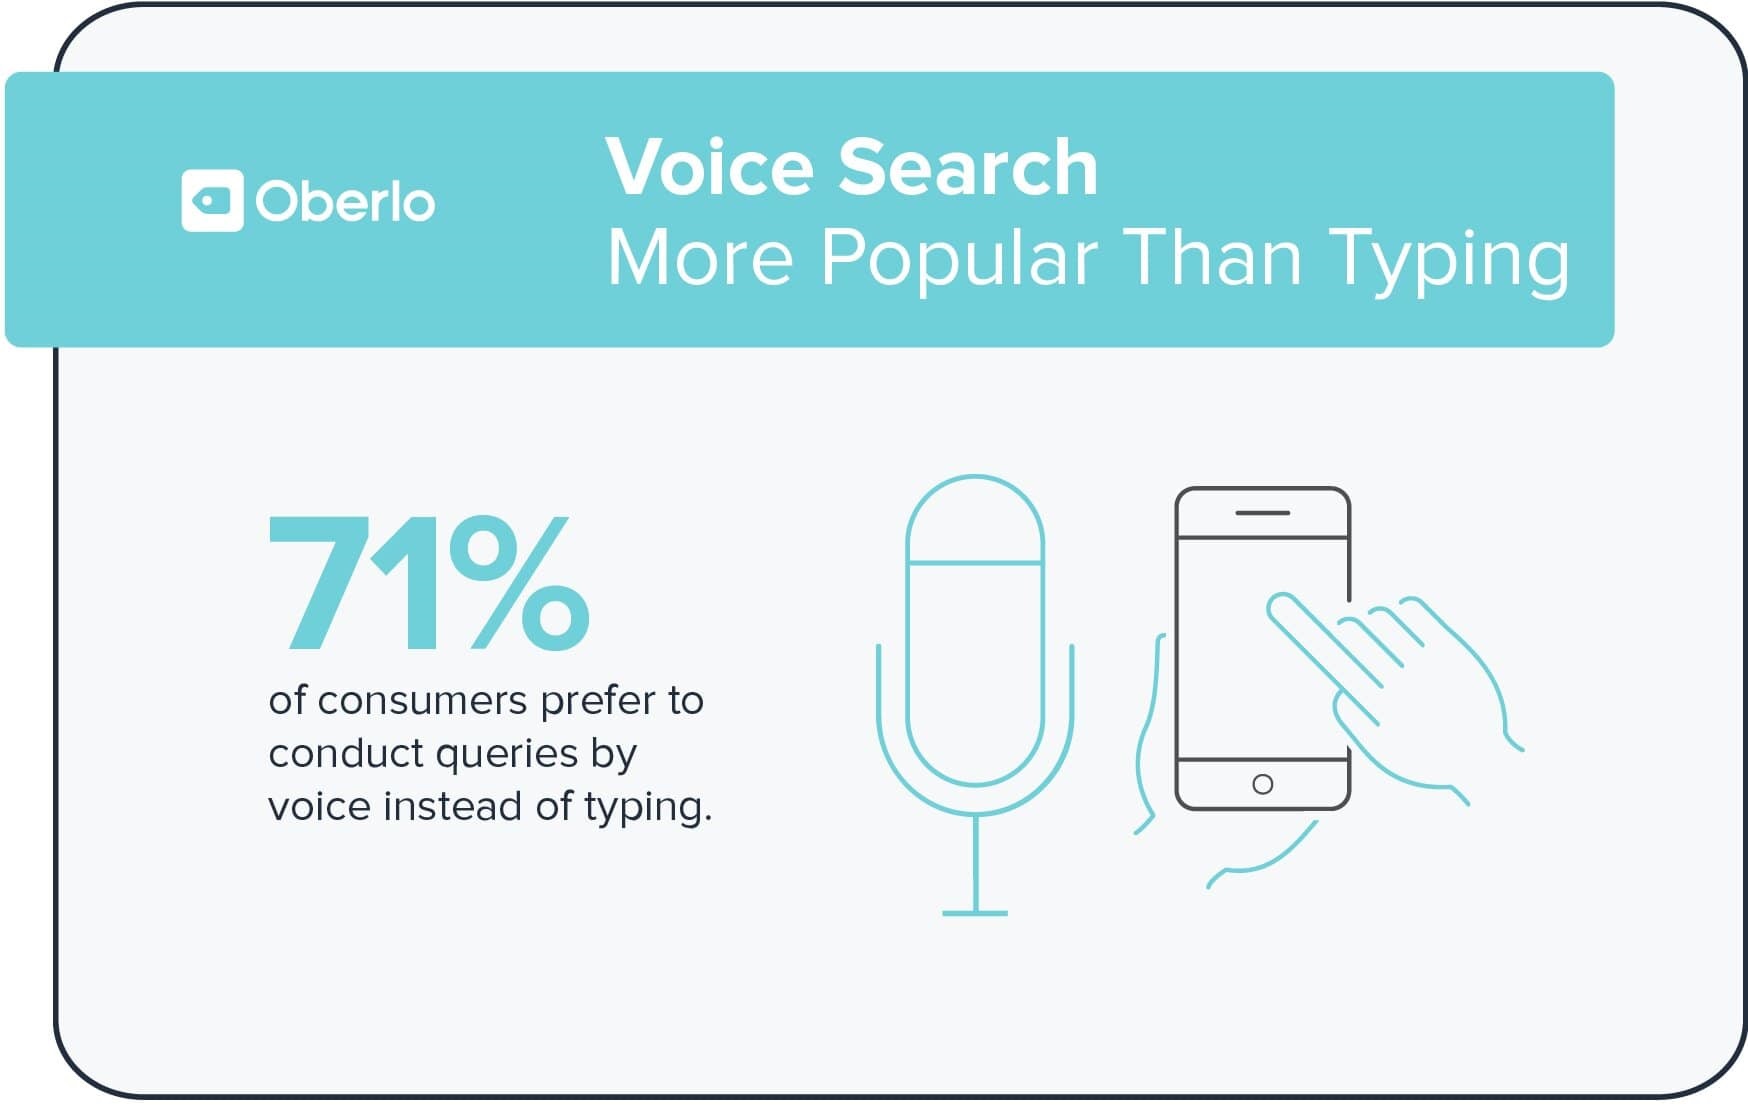 Voice-based search assistants